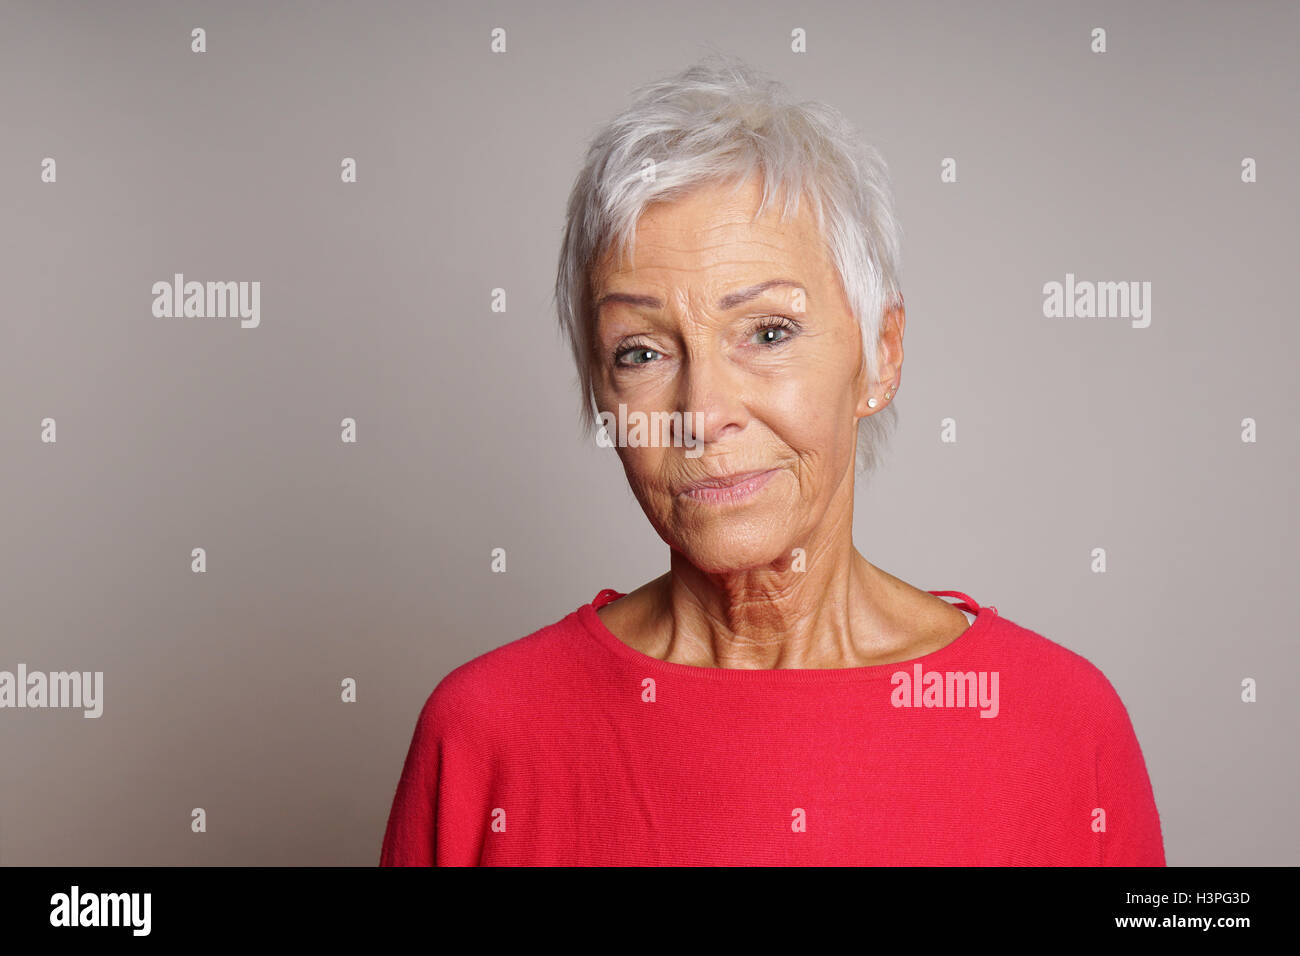 mature woman with skeptical look on her face Stock Photo